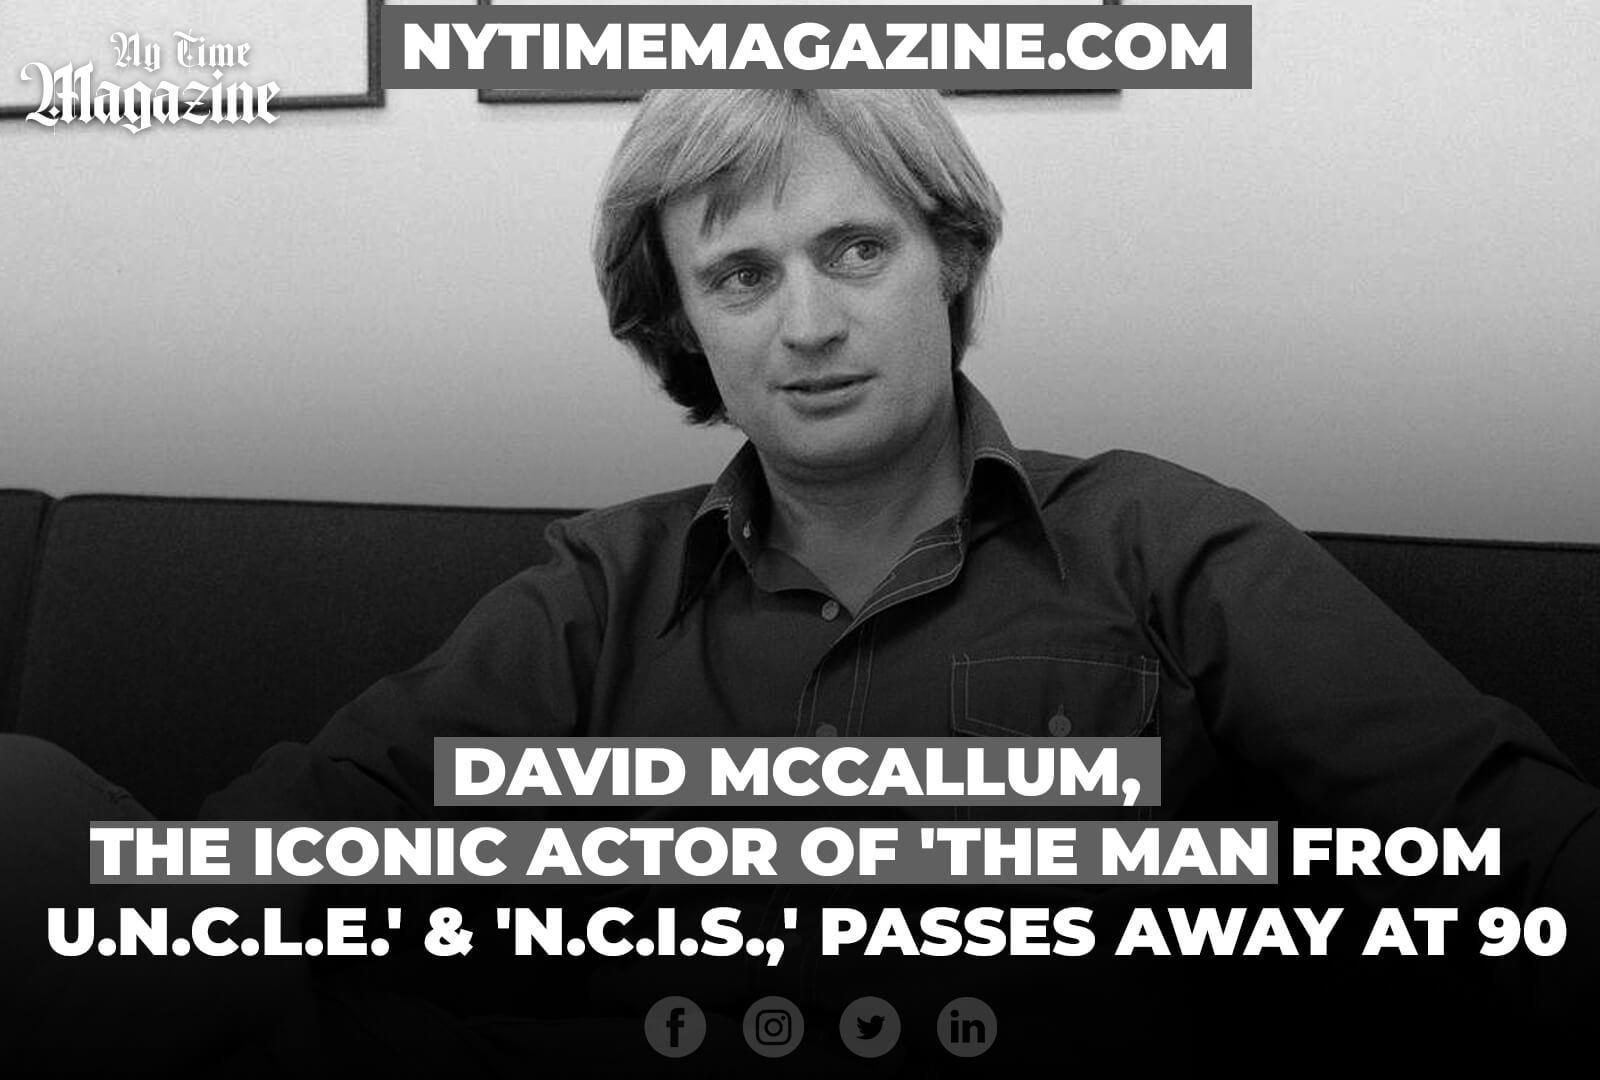 David McCallum, the Iconic Actor of 'The Man From U.N.C.L.E.' and 'N.C.I.S.,' Passes Away at 90